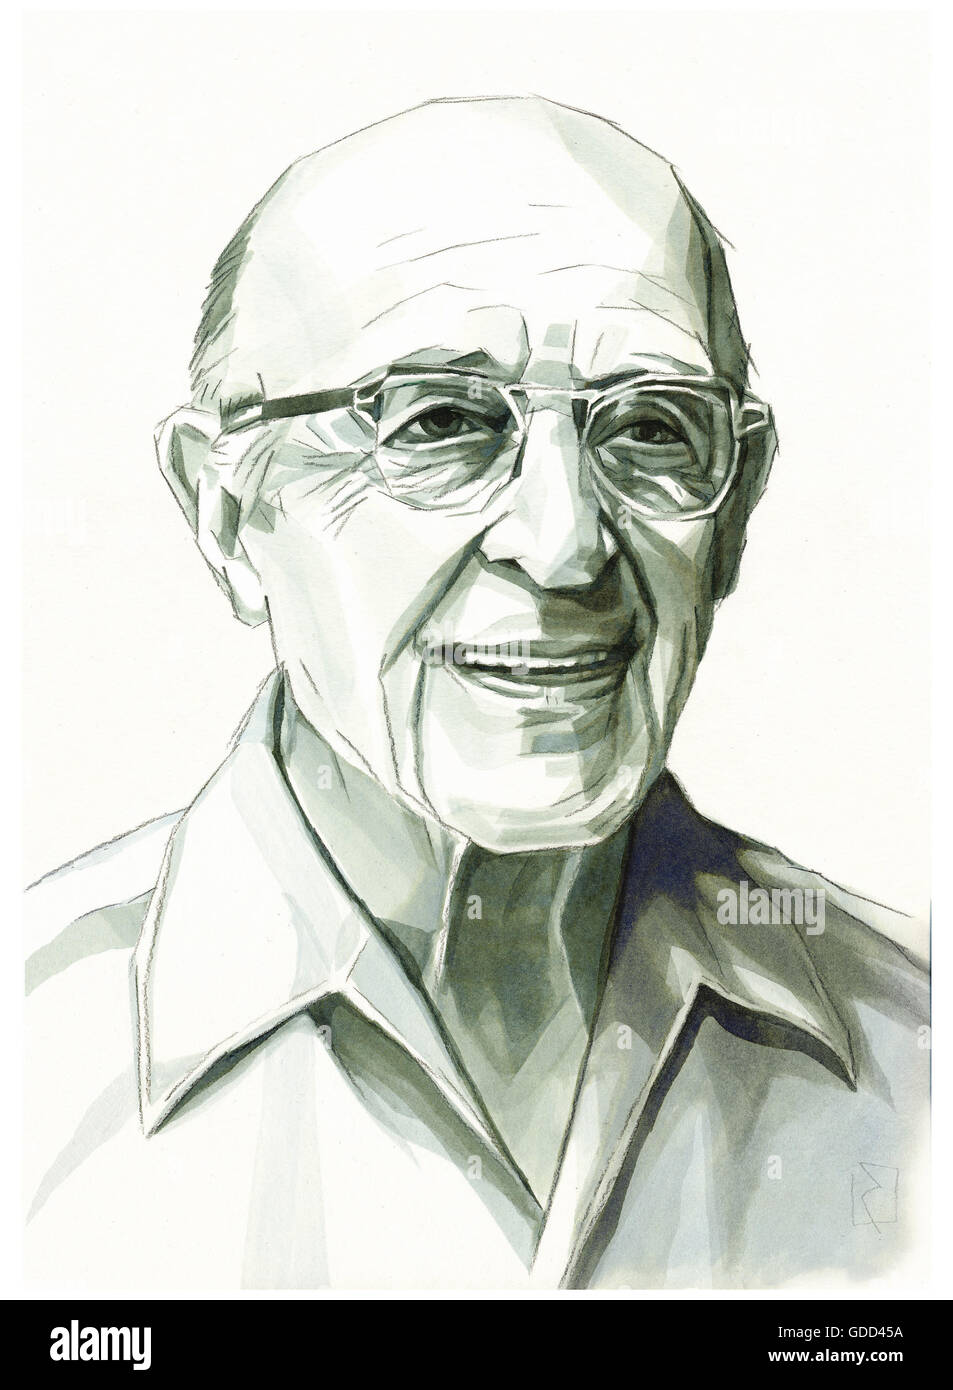 Rogers, Carl, 8.1.1902 - 4.2.1987, American medic / physician (medical doctor), portrait, monochrome drawing by Jan Rieckhoff, 1.12.2008, Artist's Copyright already cleared through INTERFOTO, no additional clearance necessary Stock Photo